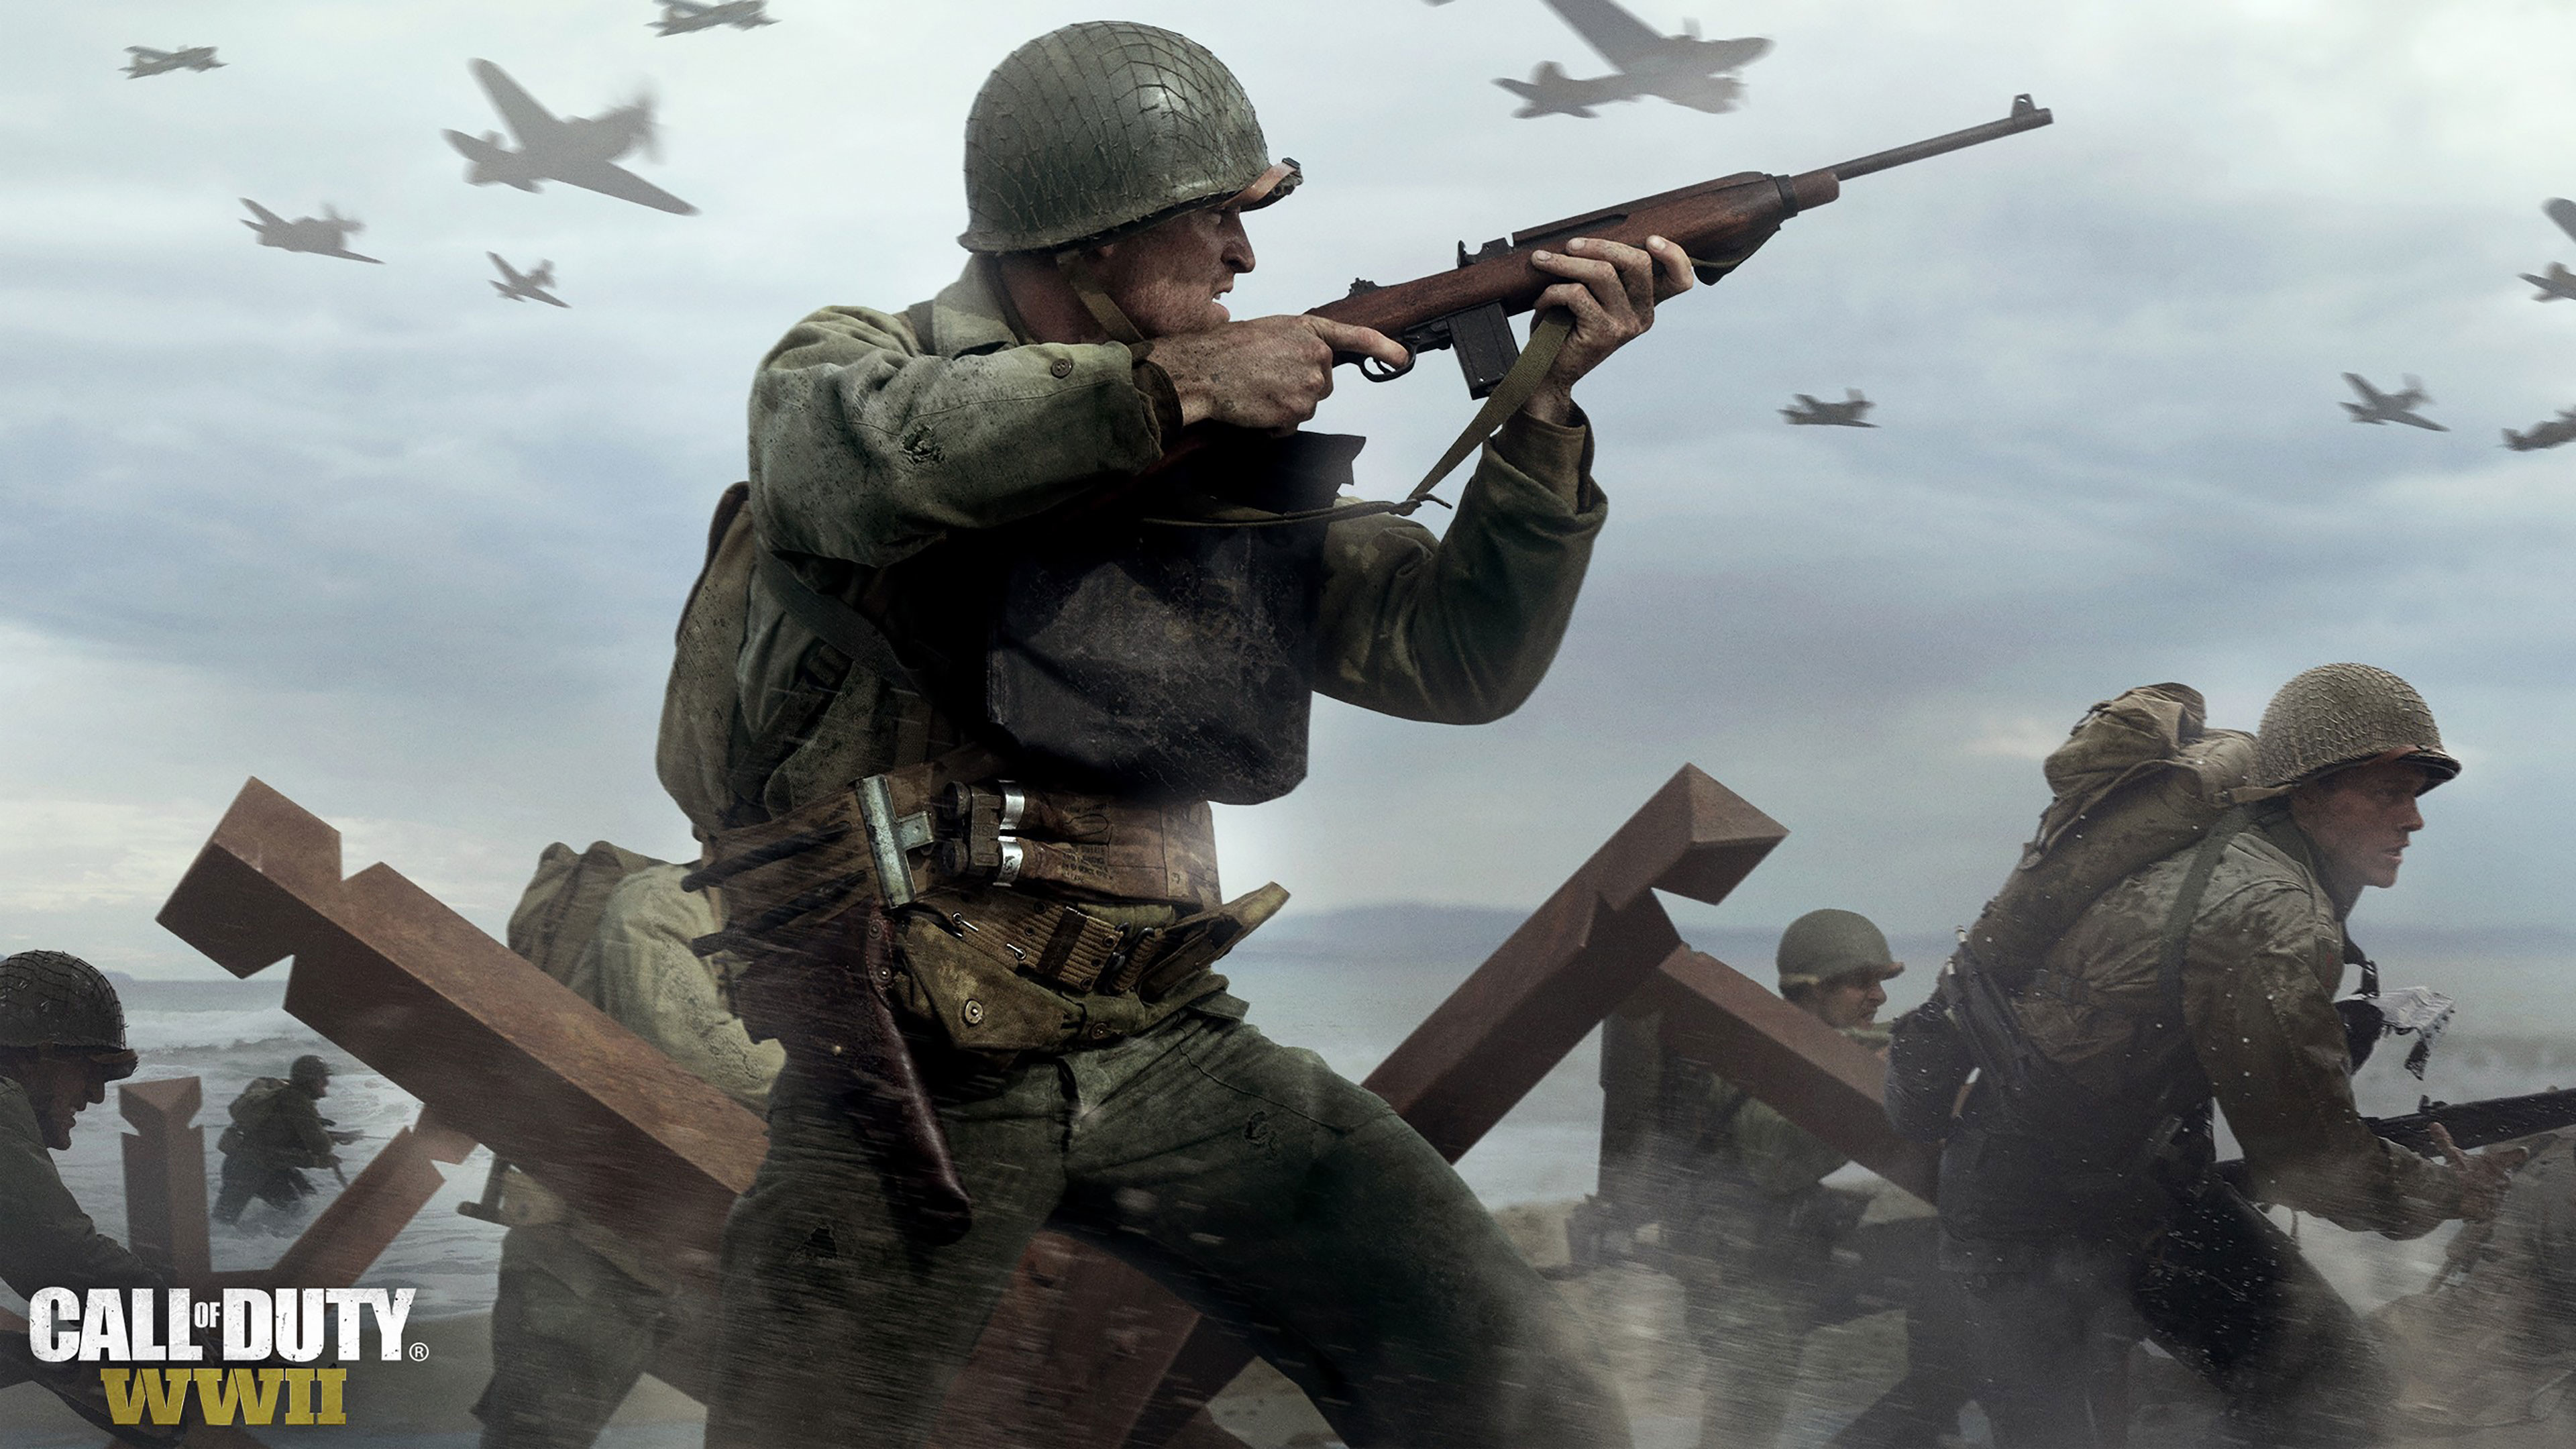 ww2 wallpaper,action adventure game,soldier,shooter game,pc game,military